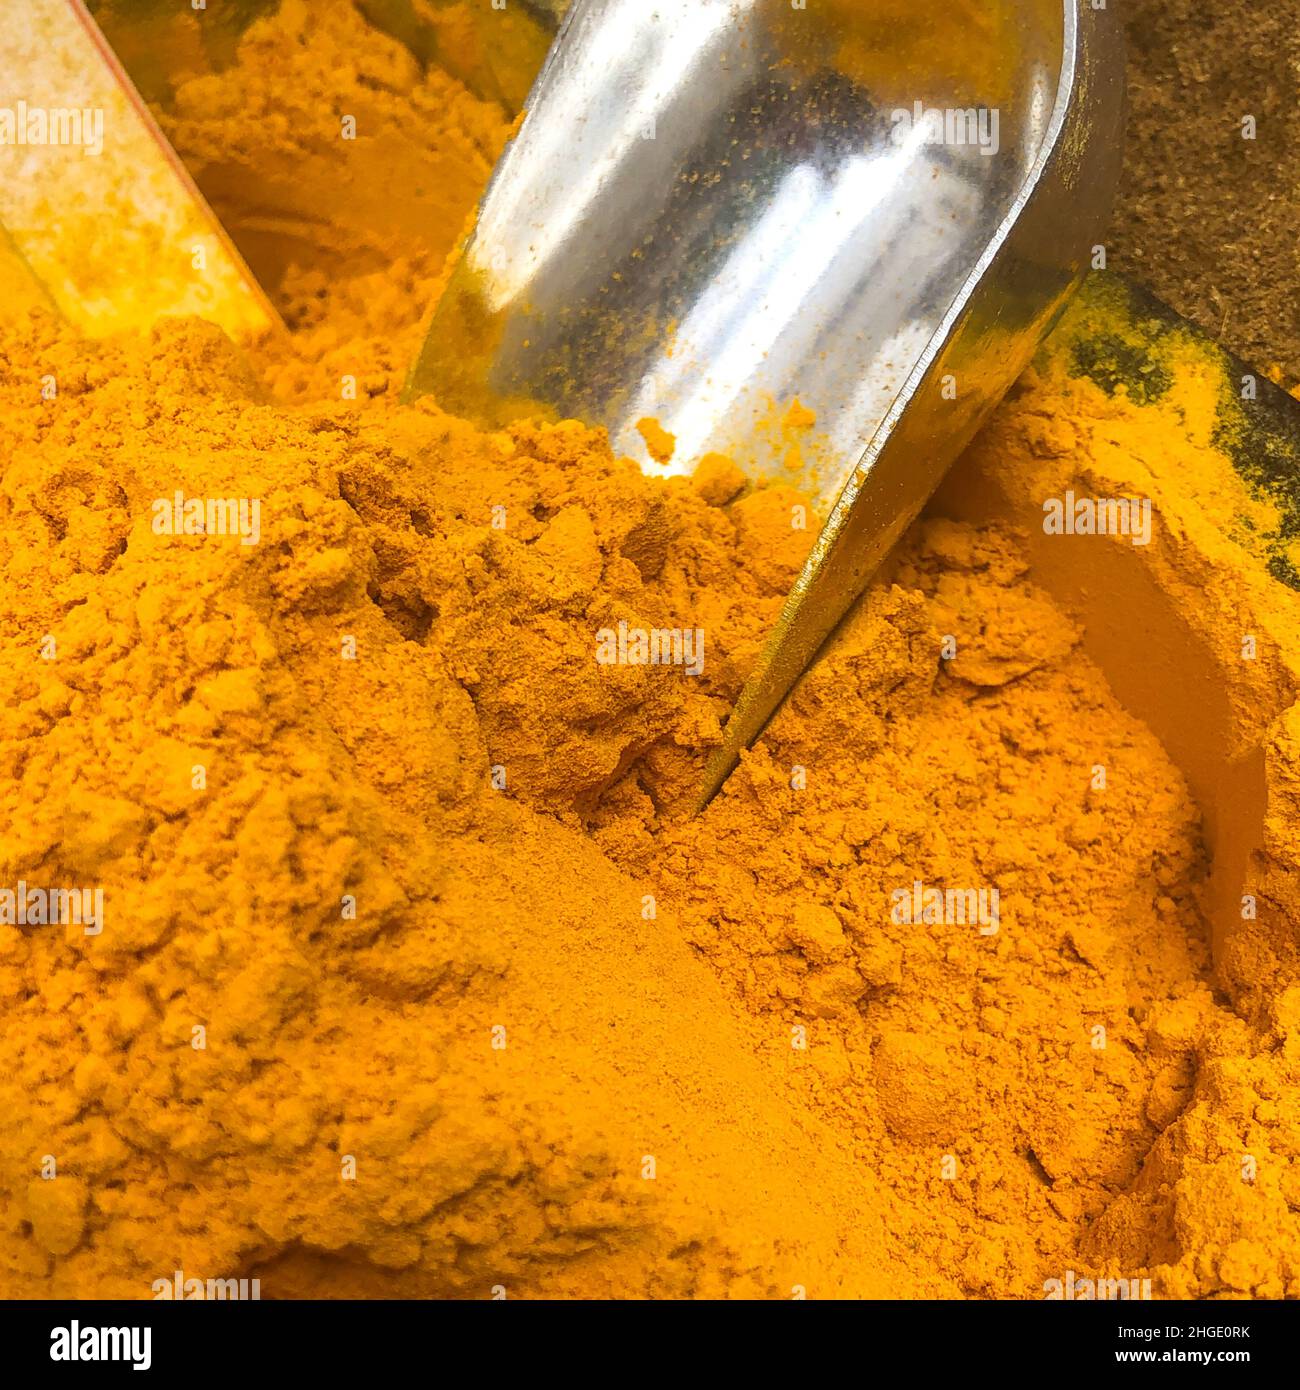 Tumeric powder with a stainless steel scoop Stock Photo